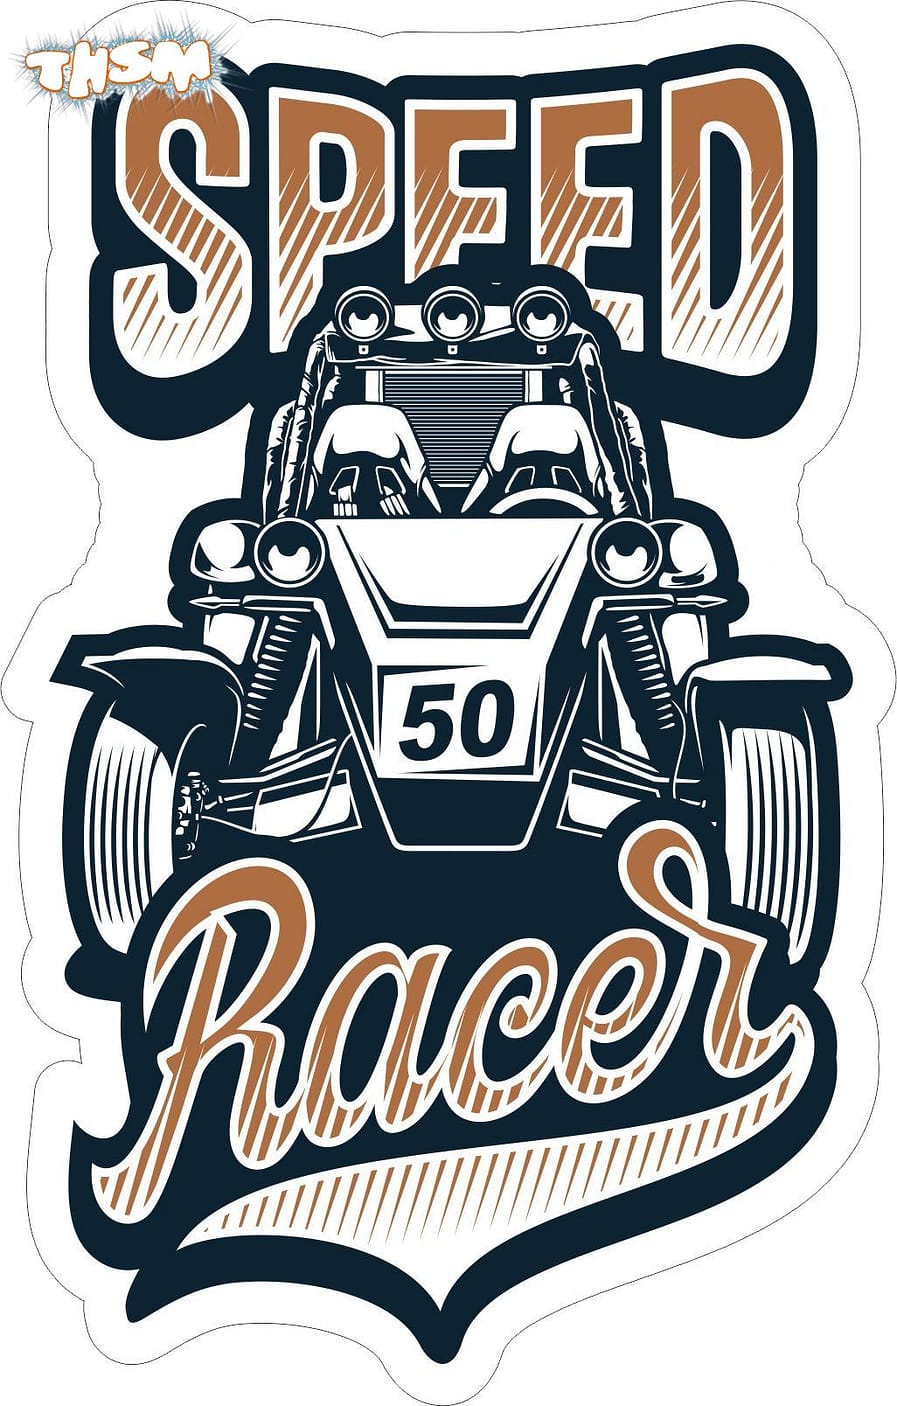 Speed Racer Sticker Free Vector cdr Download - 3axis.co